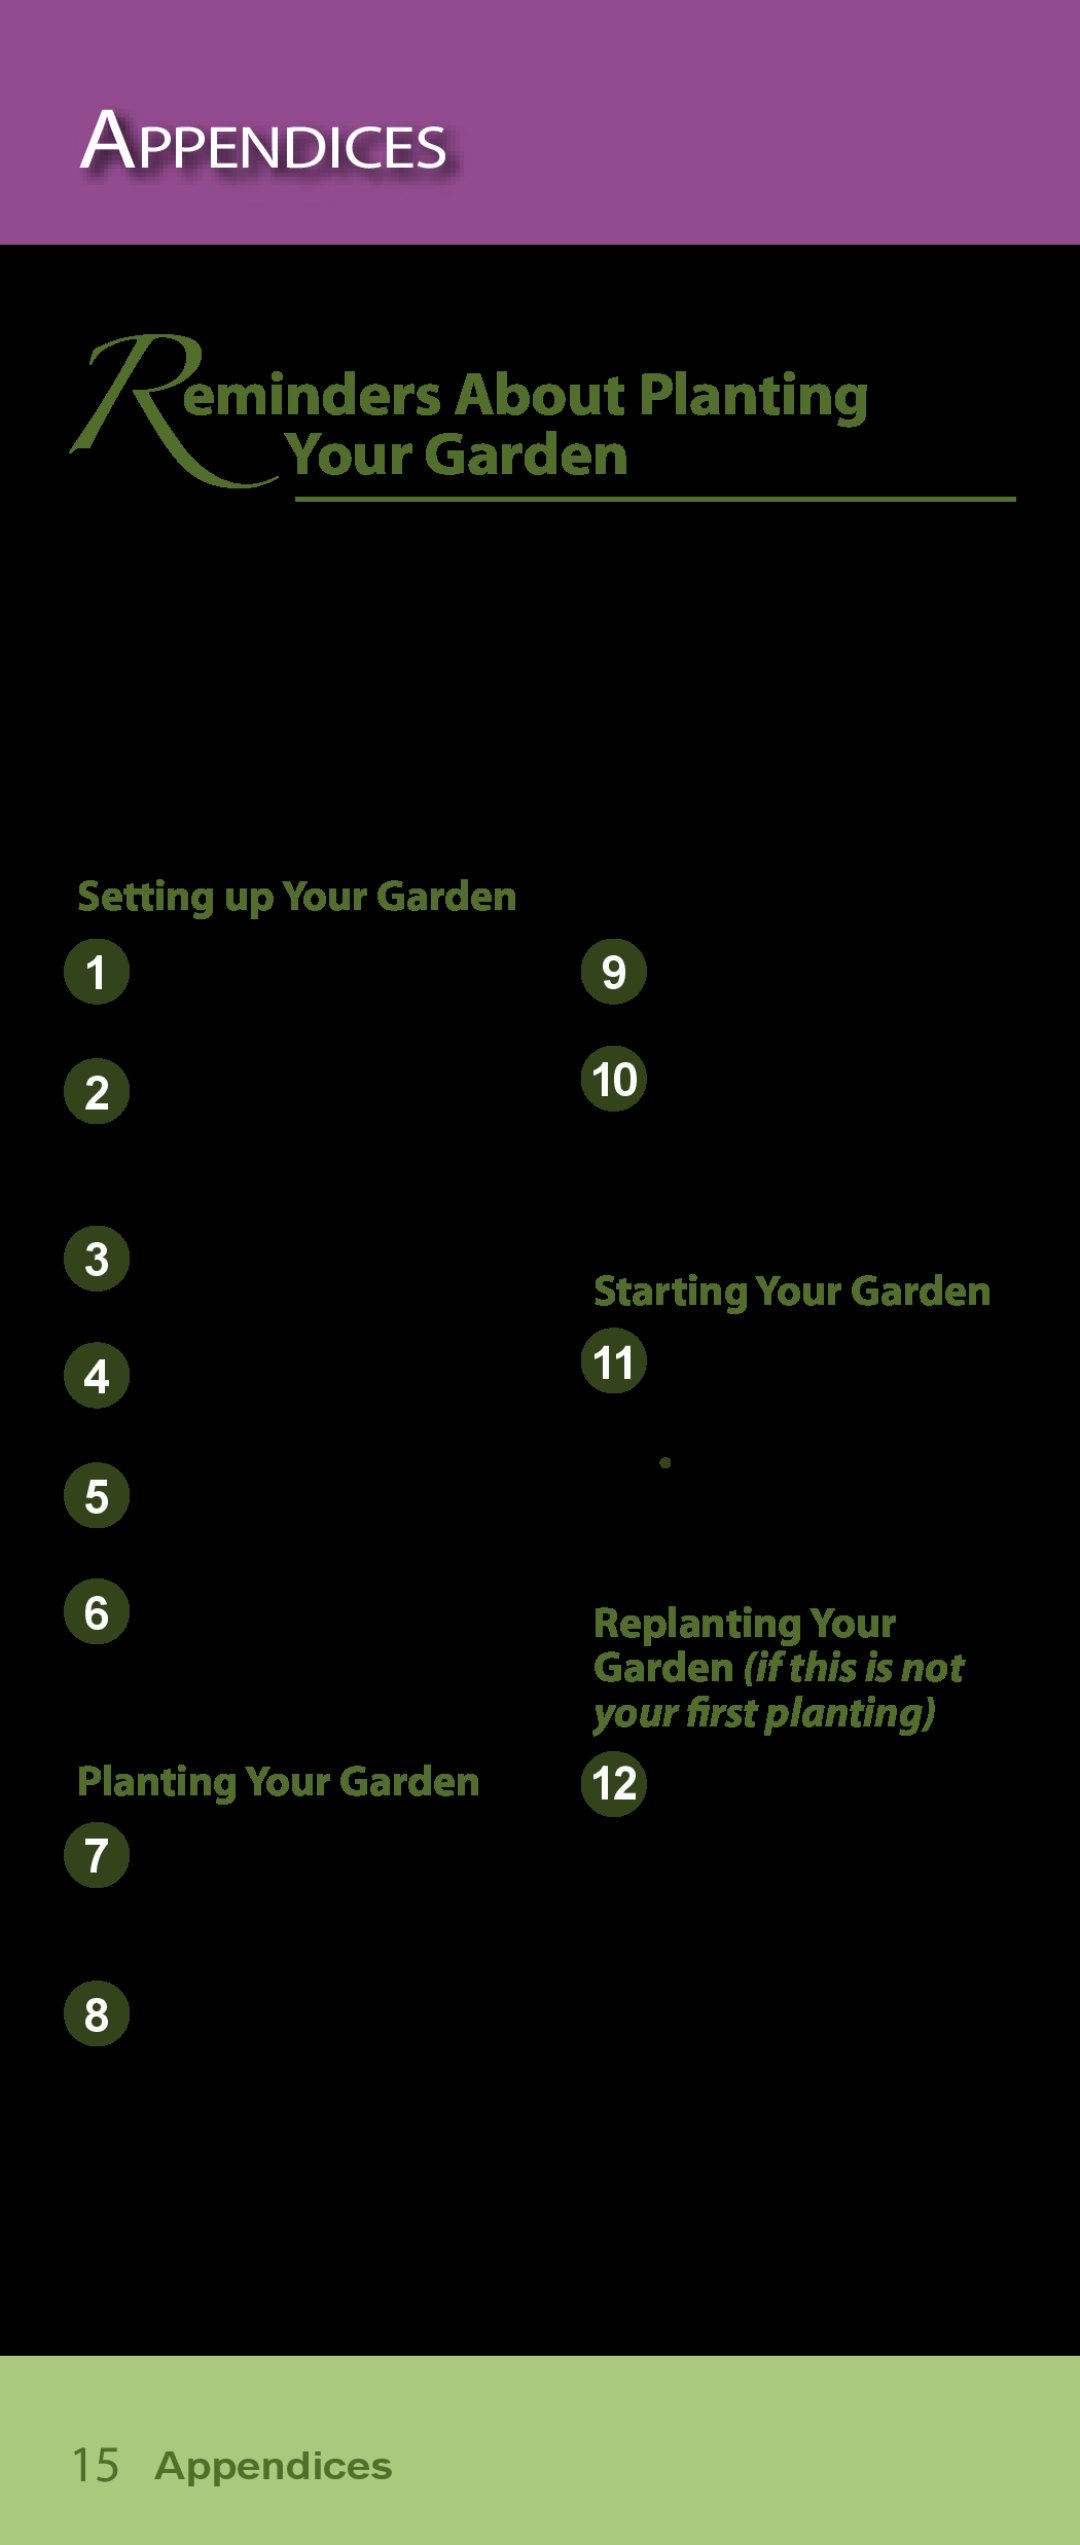 AeroGarden Flower Series Appendices, Reminders About Planting Your Garden, Setting up Your Garden, Starting Your Garden 